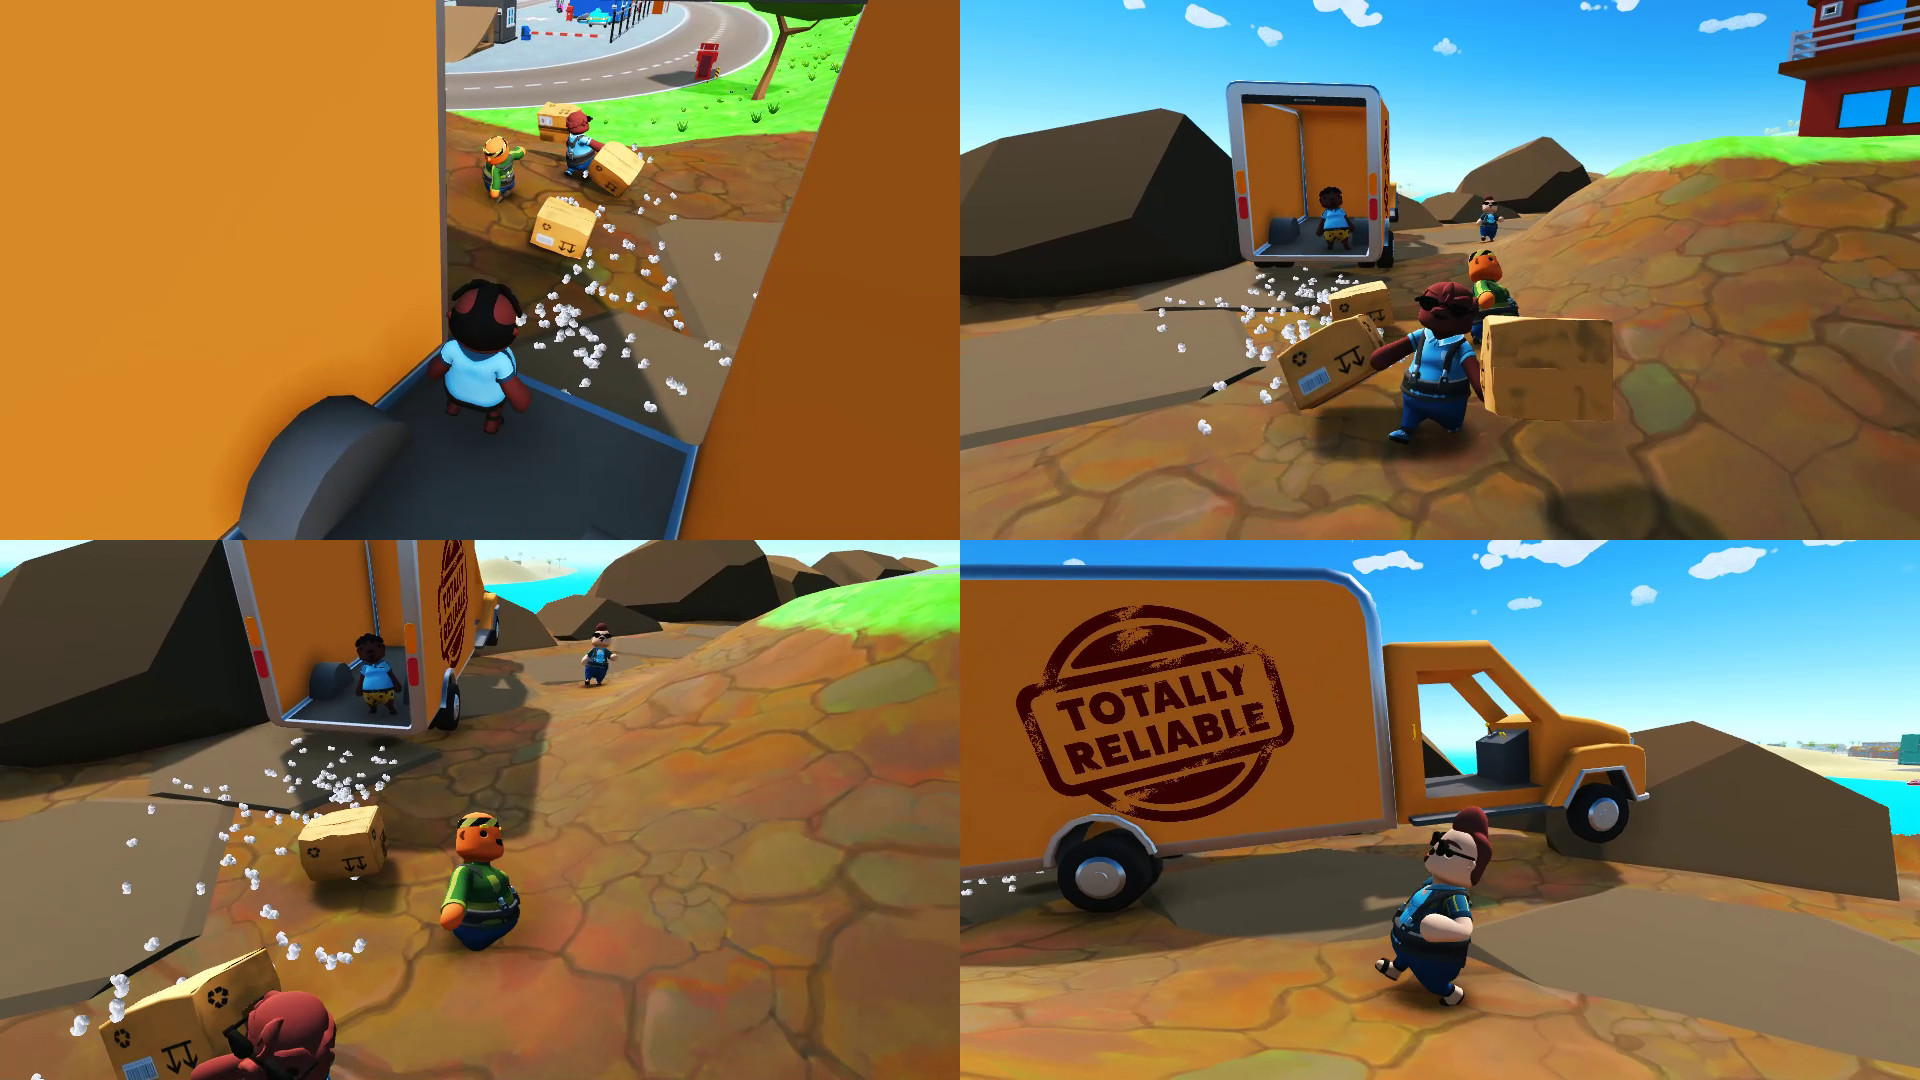 tinybuild totally reliable delivery service